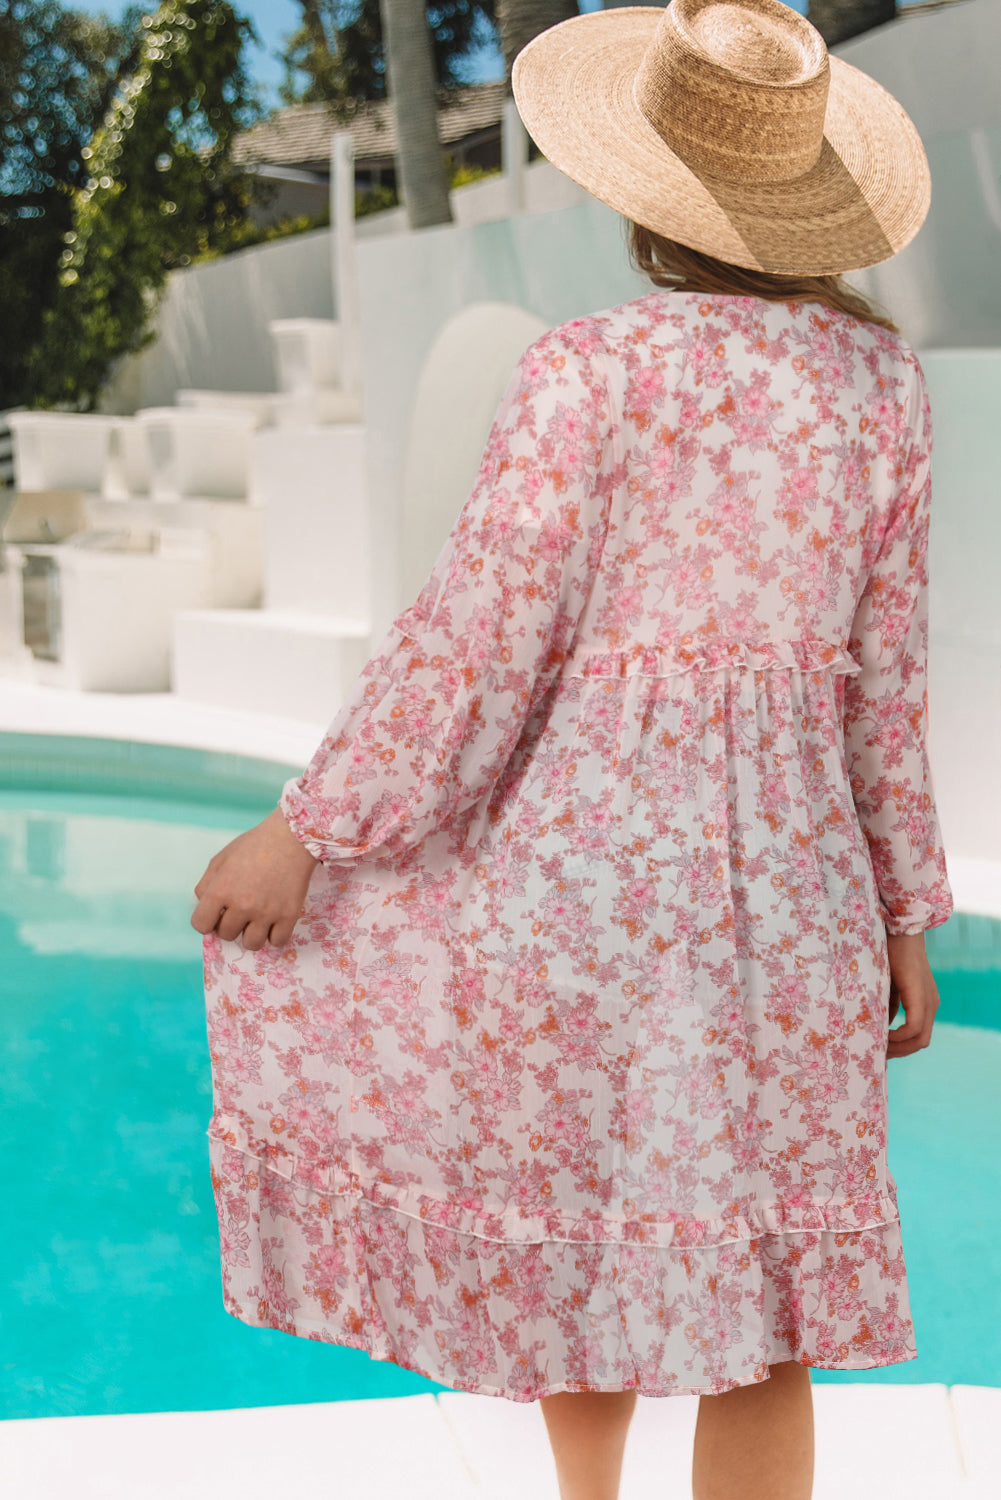 Floral Resort Style Swim Cover